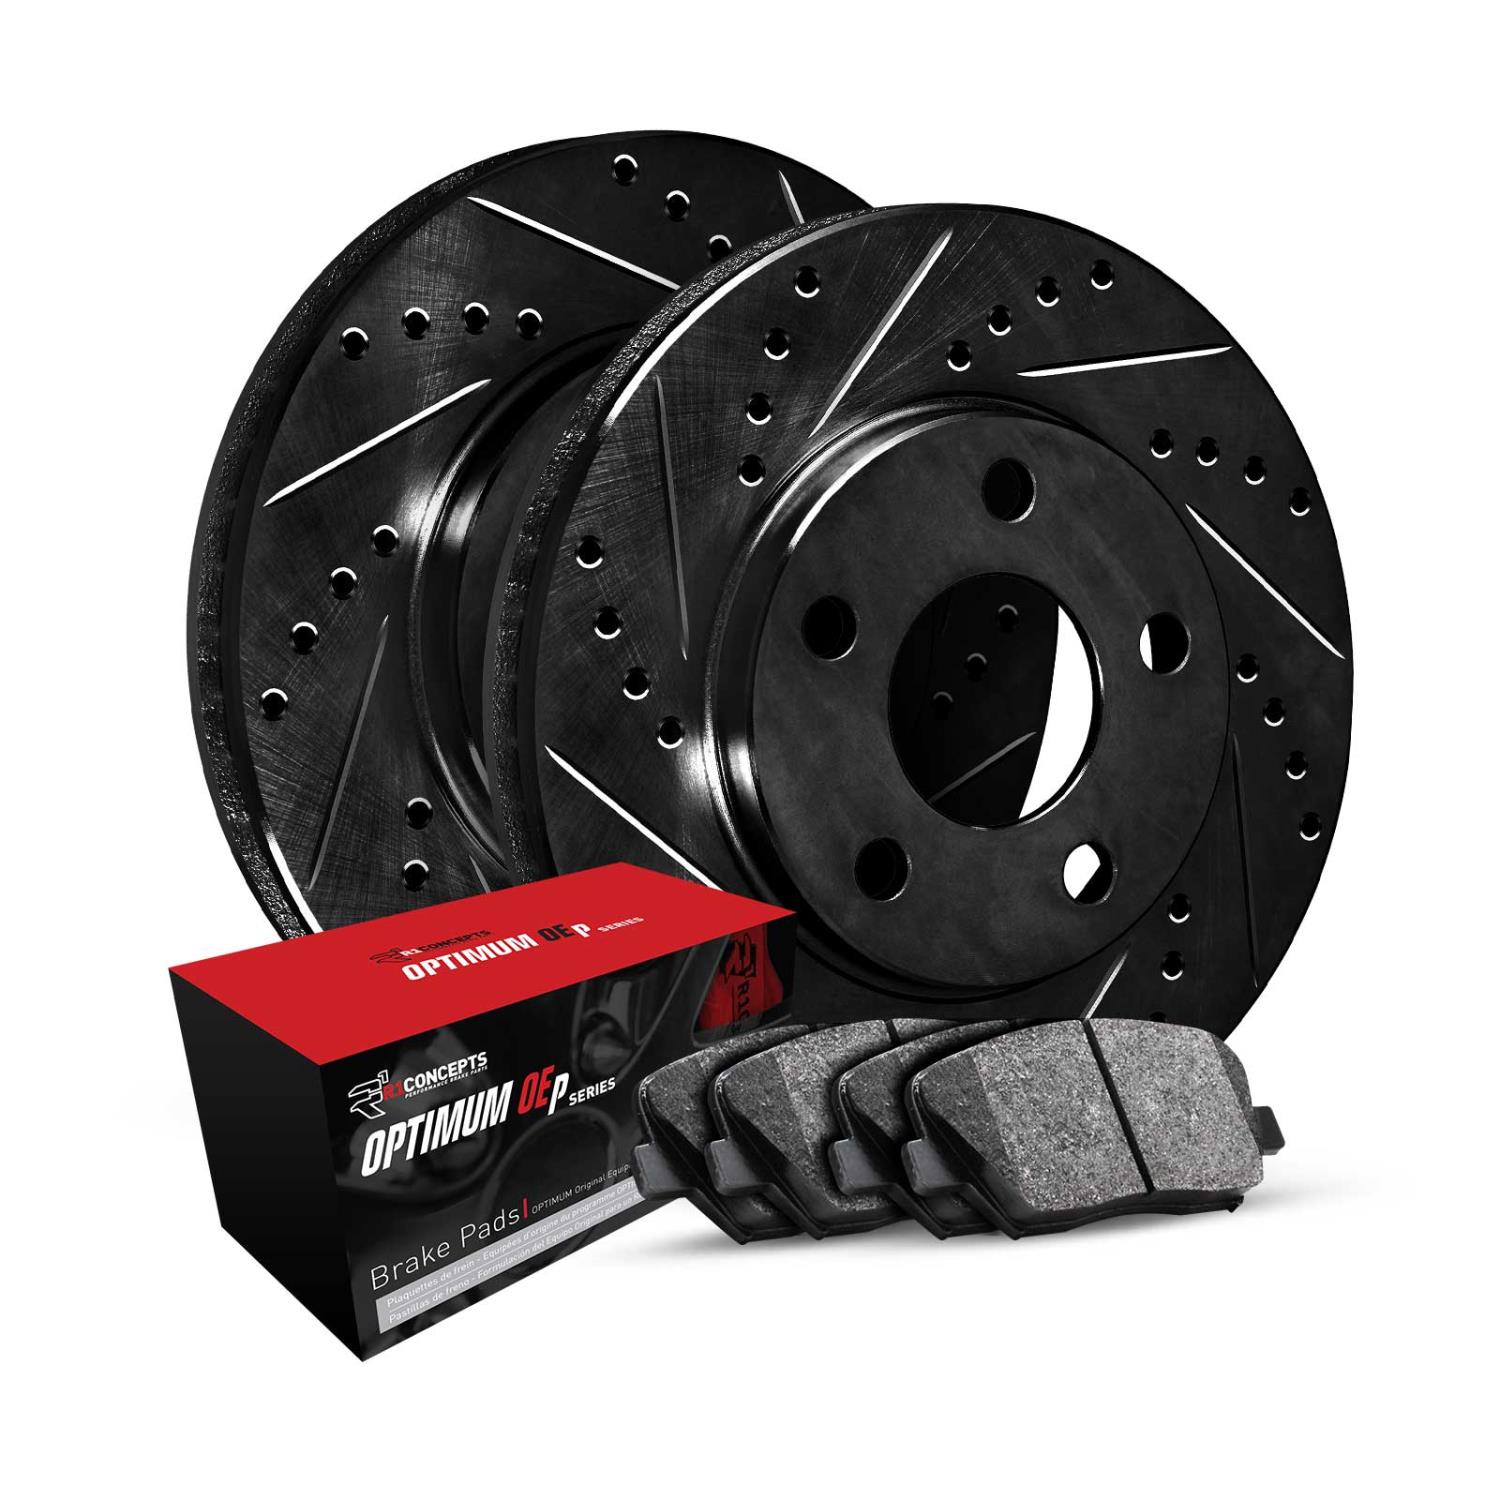 E-Line Drilled & Slotted Black Brake Rotor Set w/Optimum OE Pads, Fits Select Fits Multiple Makes/Models, Position: Front